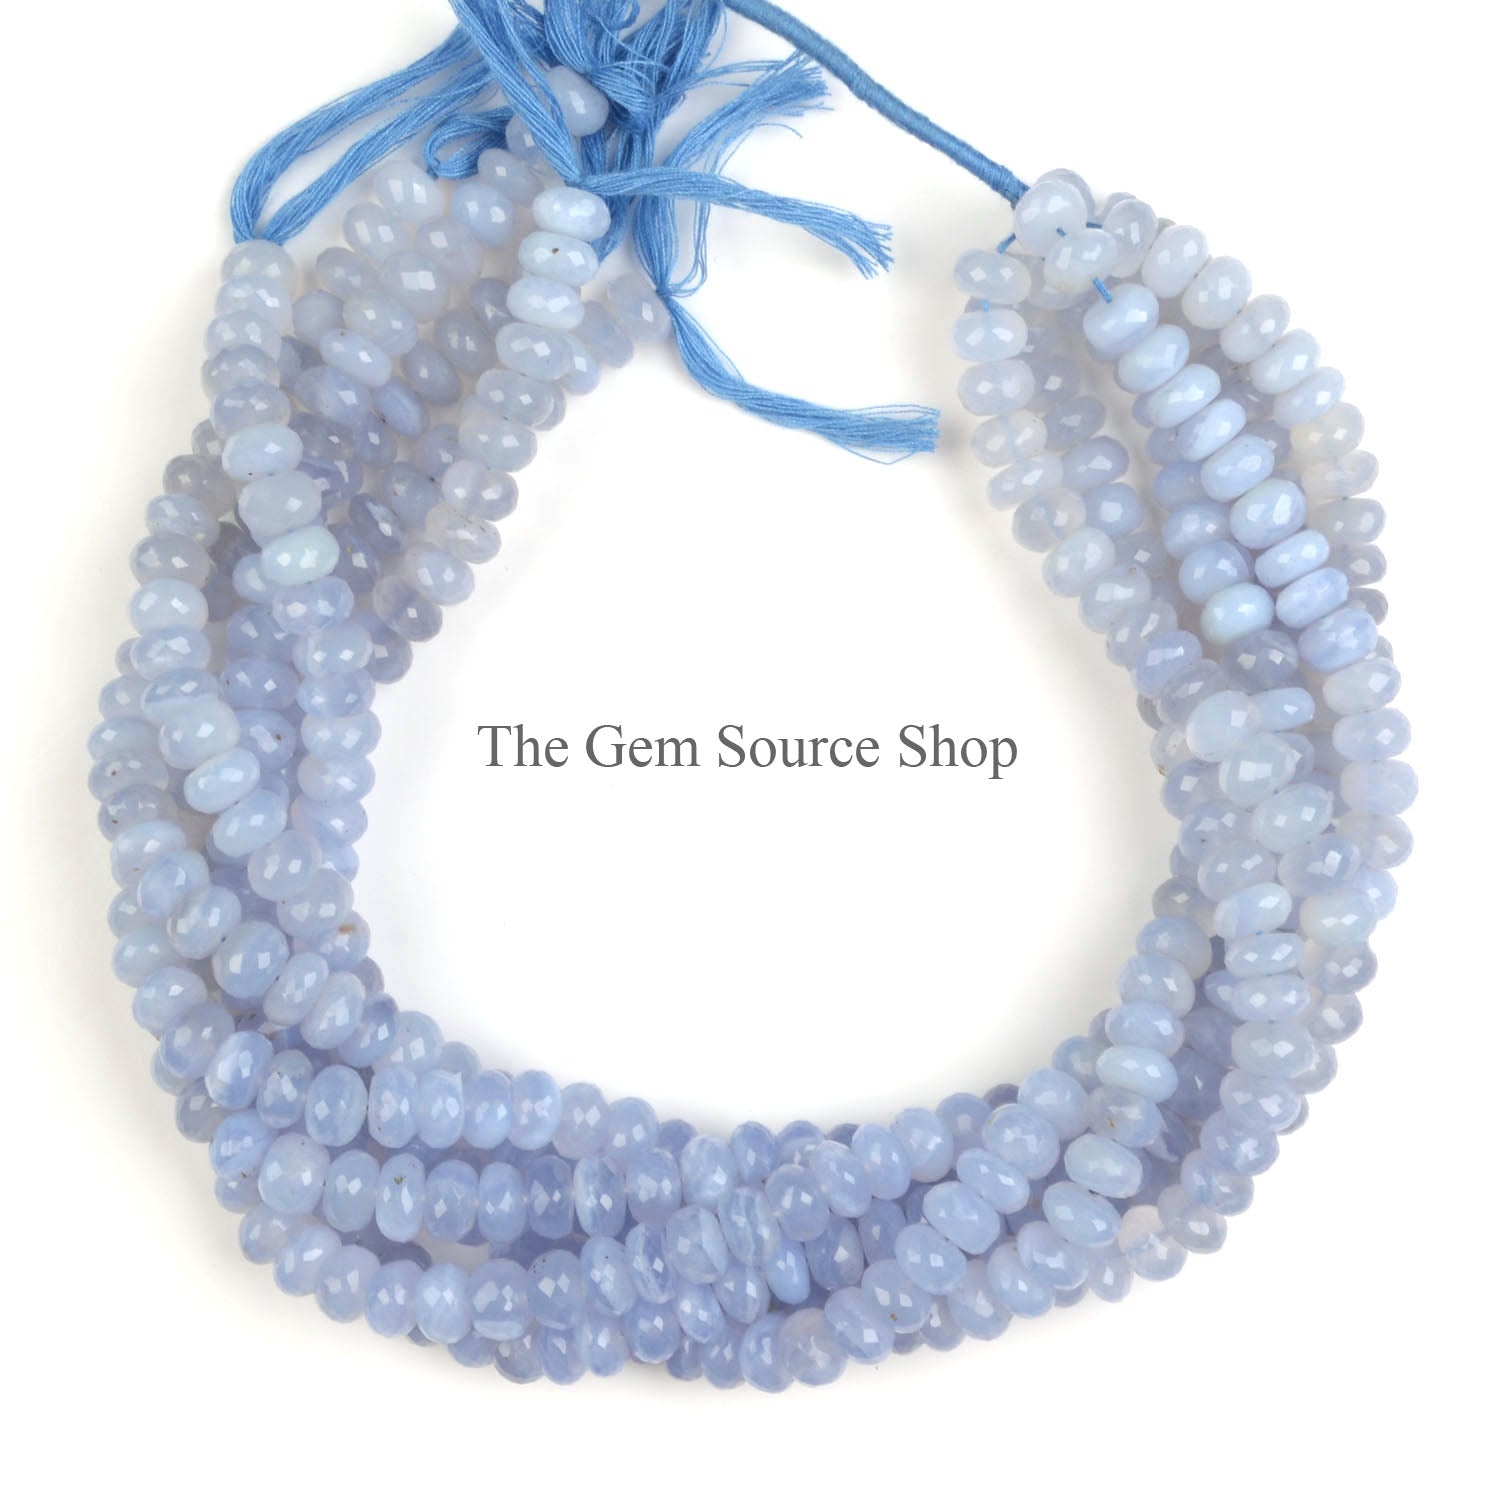 Chalcedony Beads, Chalcedony Faceted Beads, Chalcedony Rondelle Shape Beads, Gemstone Beads